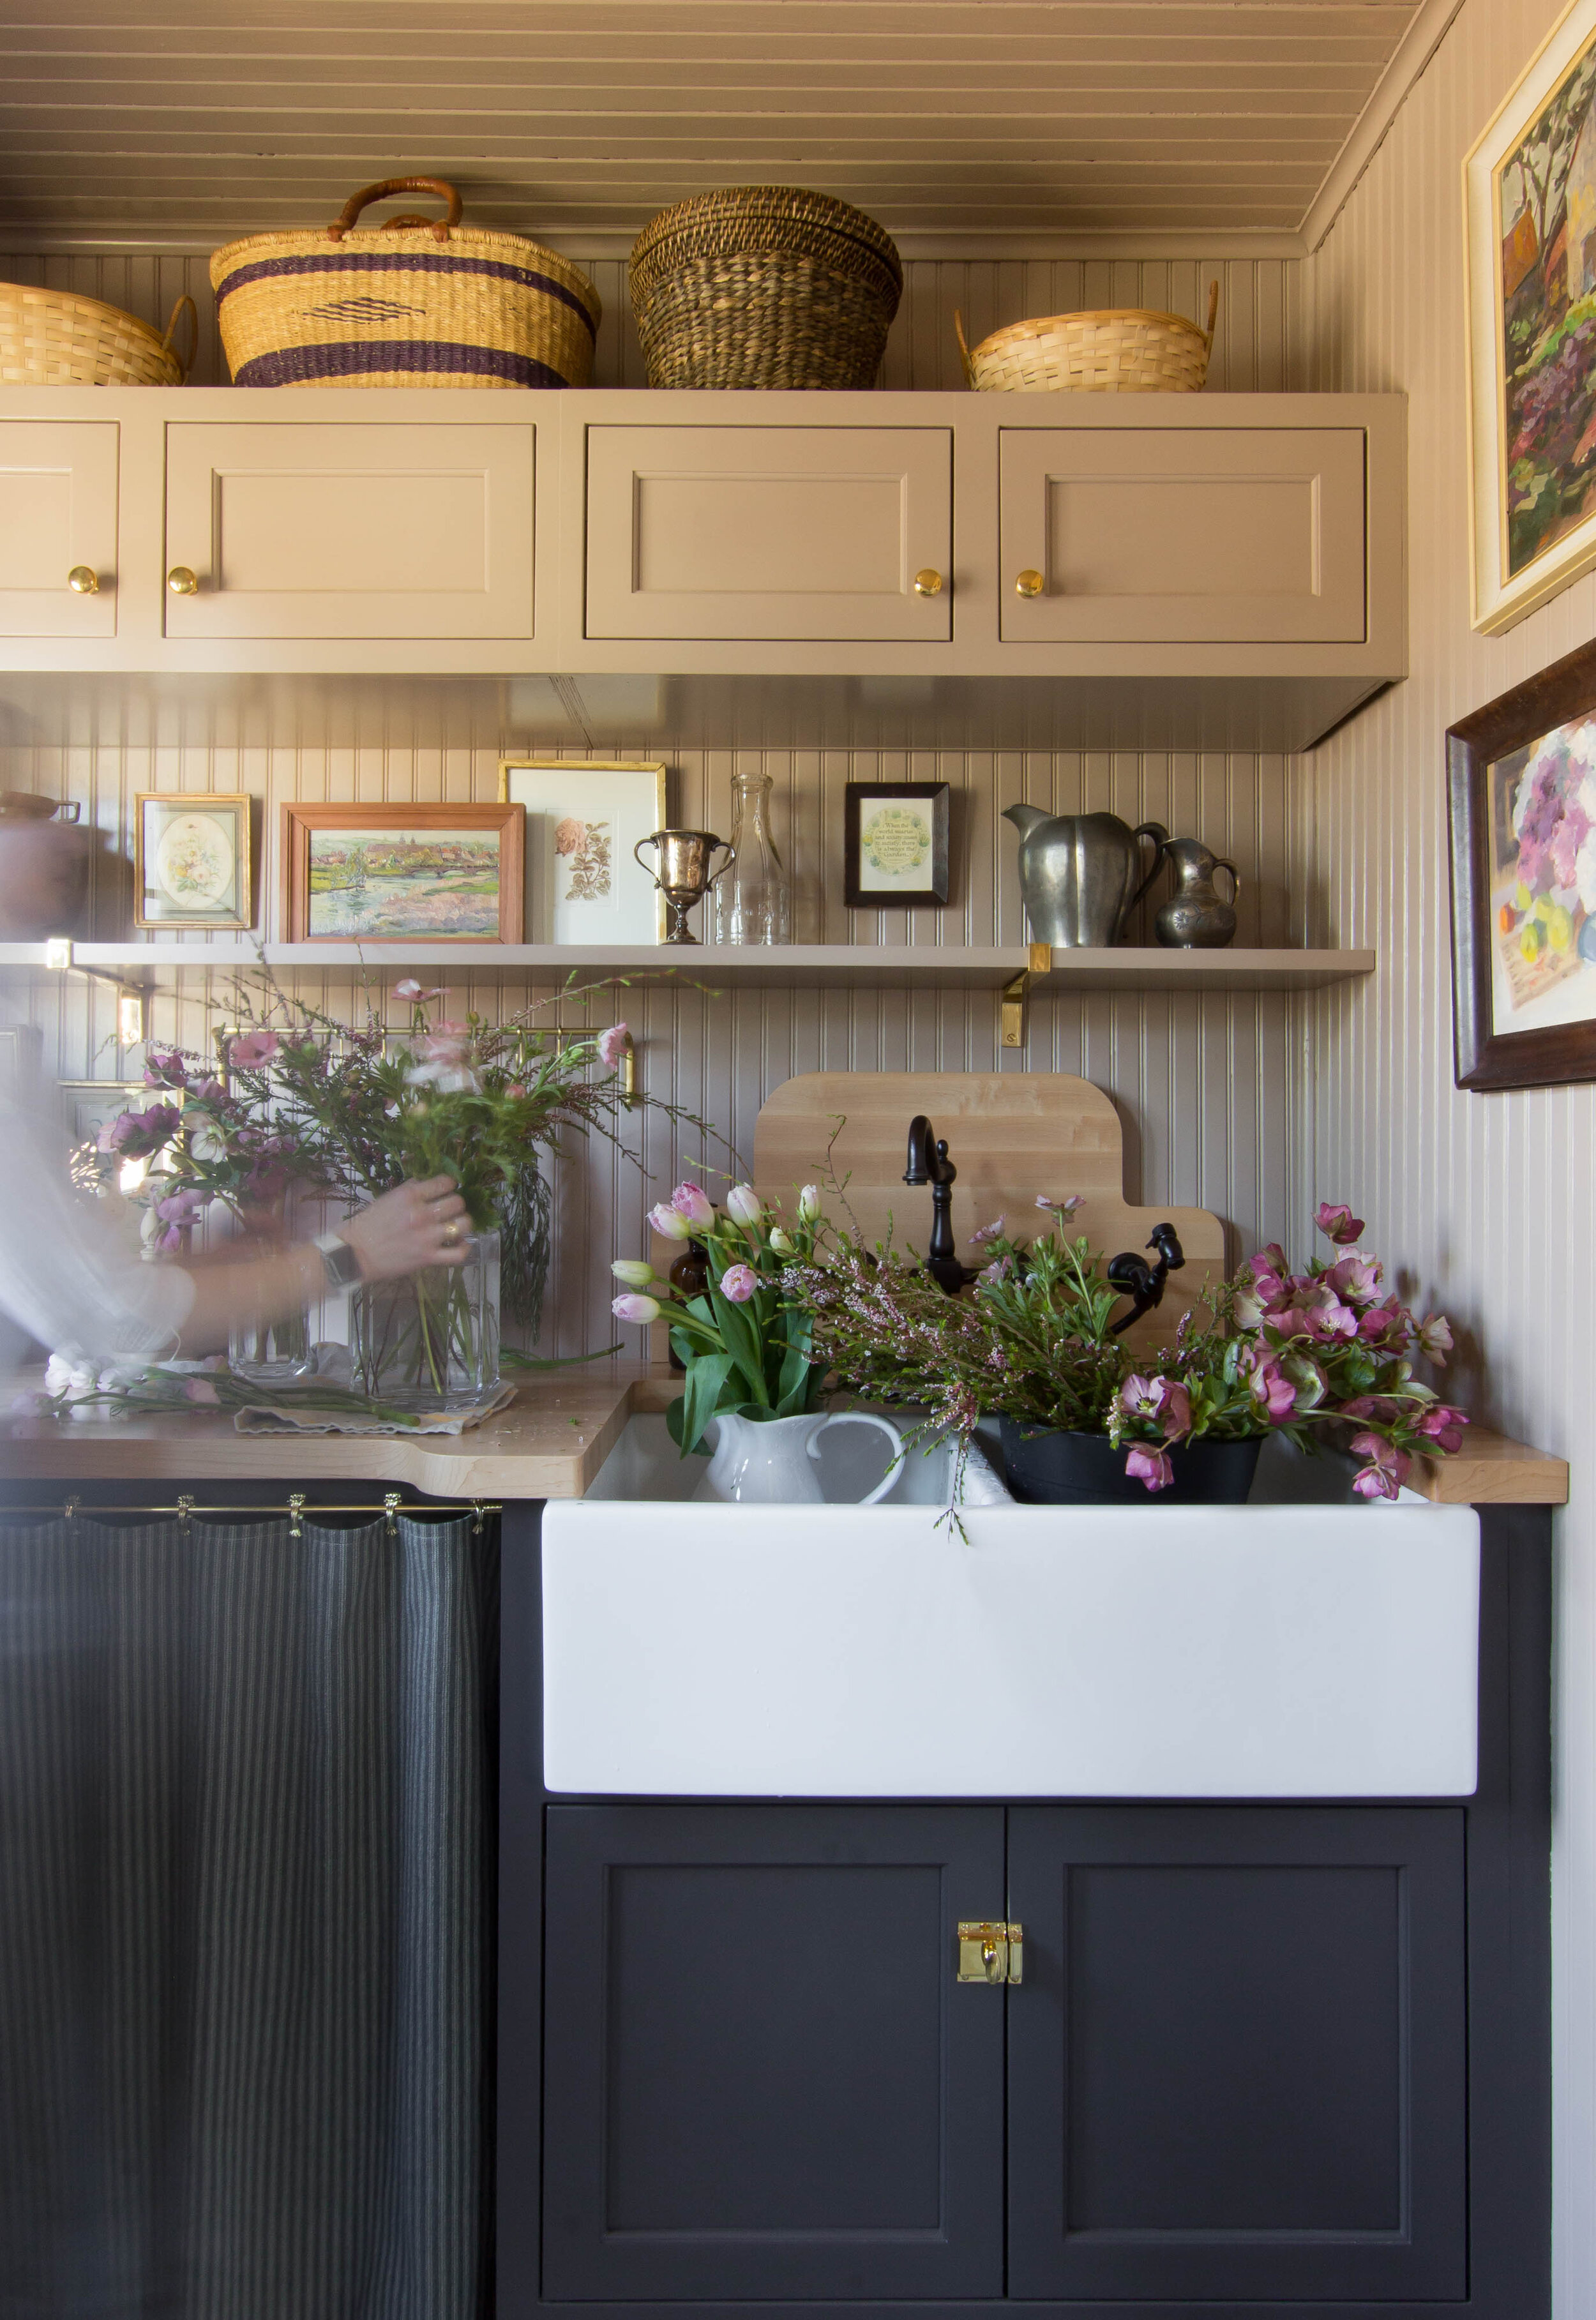  Seattle Scullery Designed by: Studio Laloc, Lauren L Caron - Photo by: Lauren L Caron © 2020  Designed with flower arranging in mind 